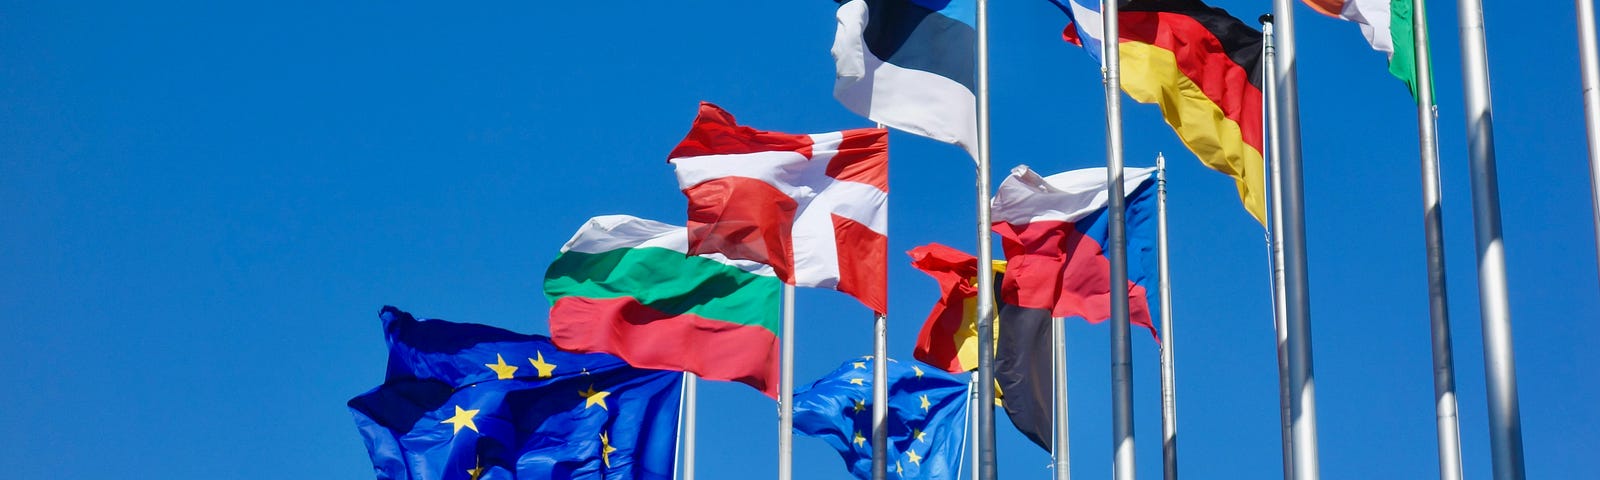 Flags of the European Union member countries.